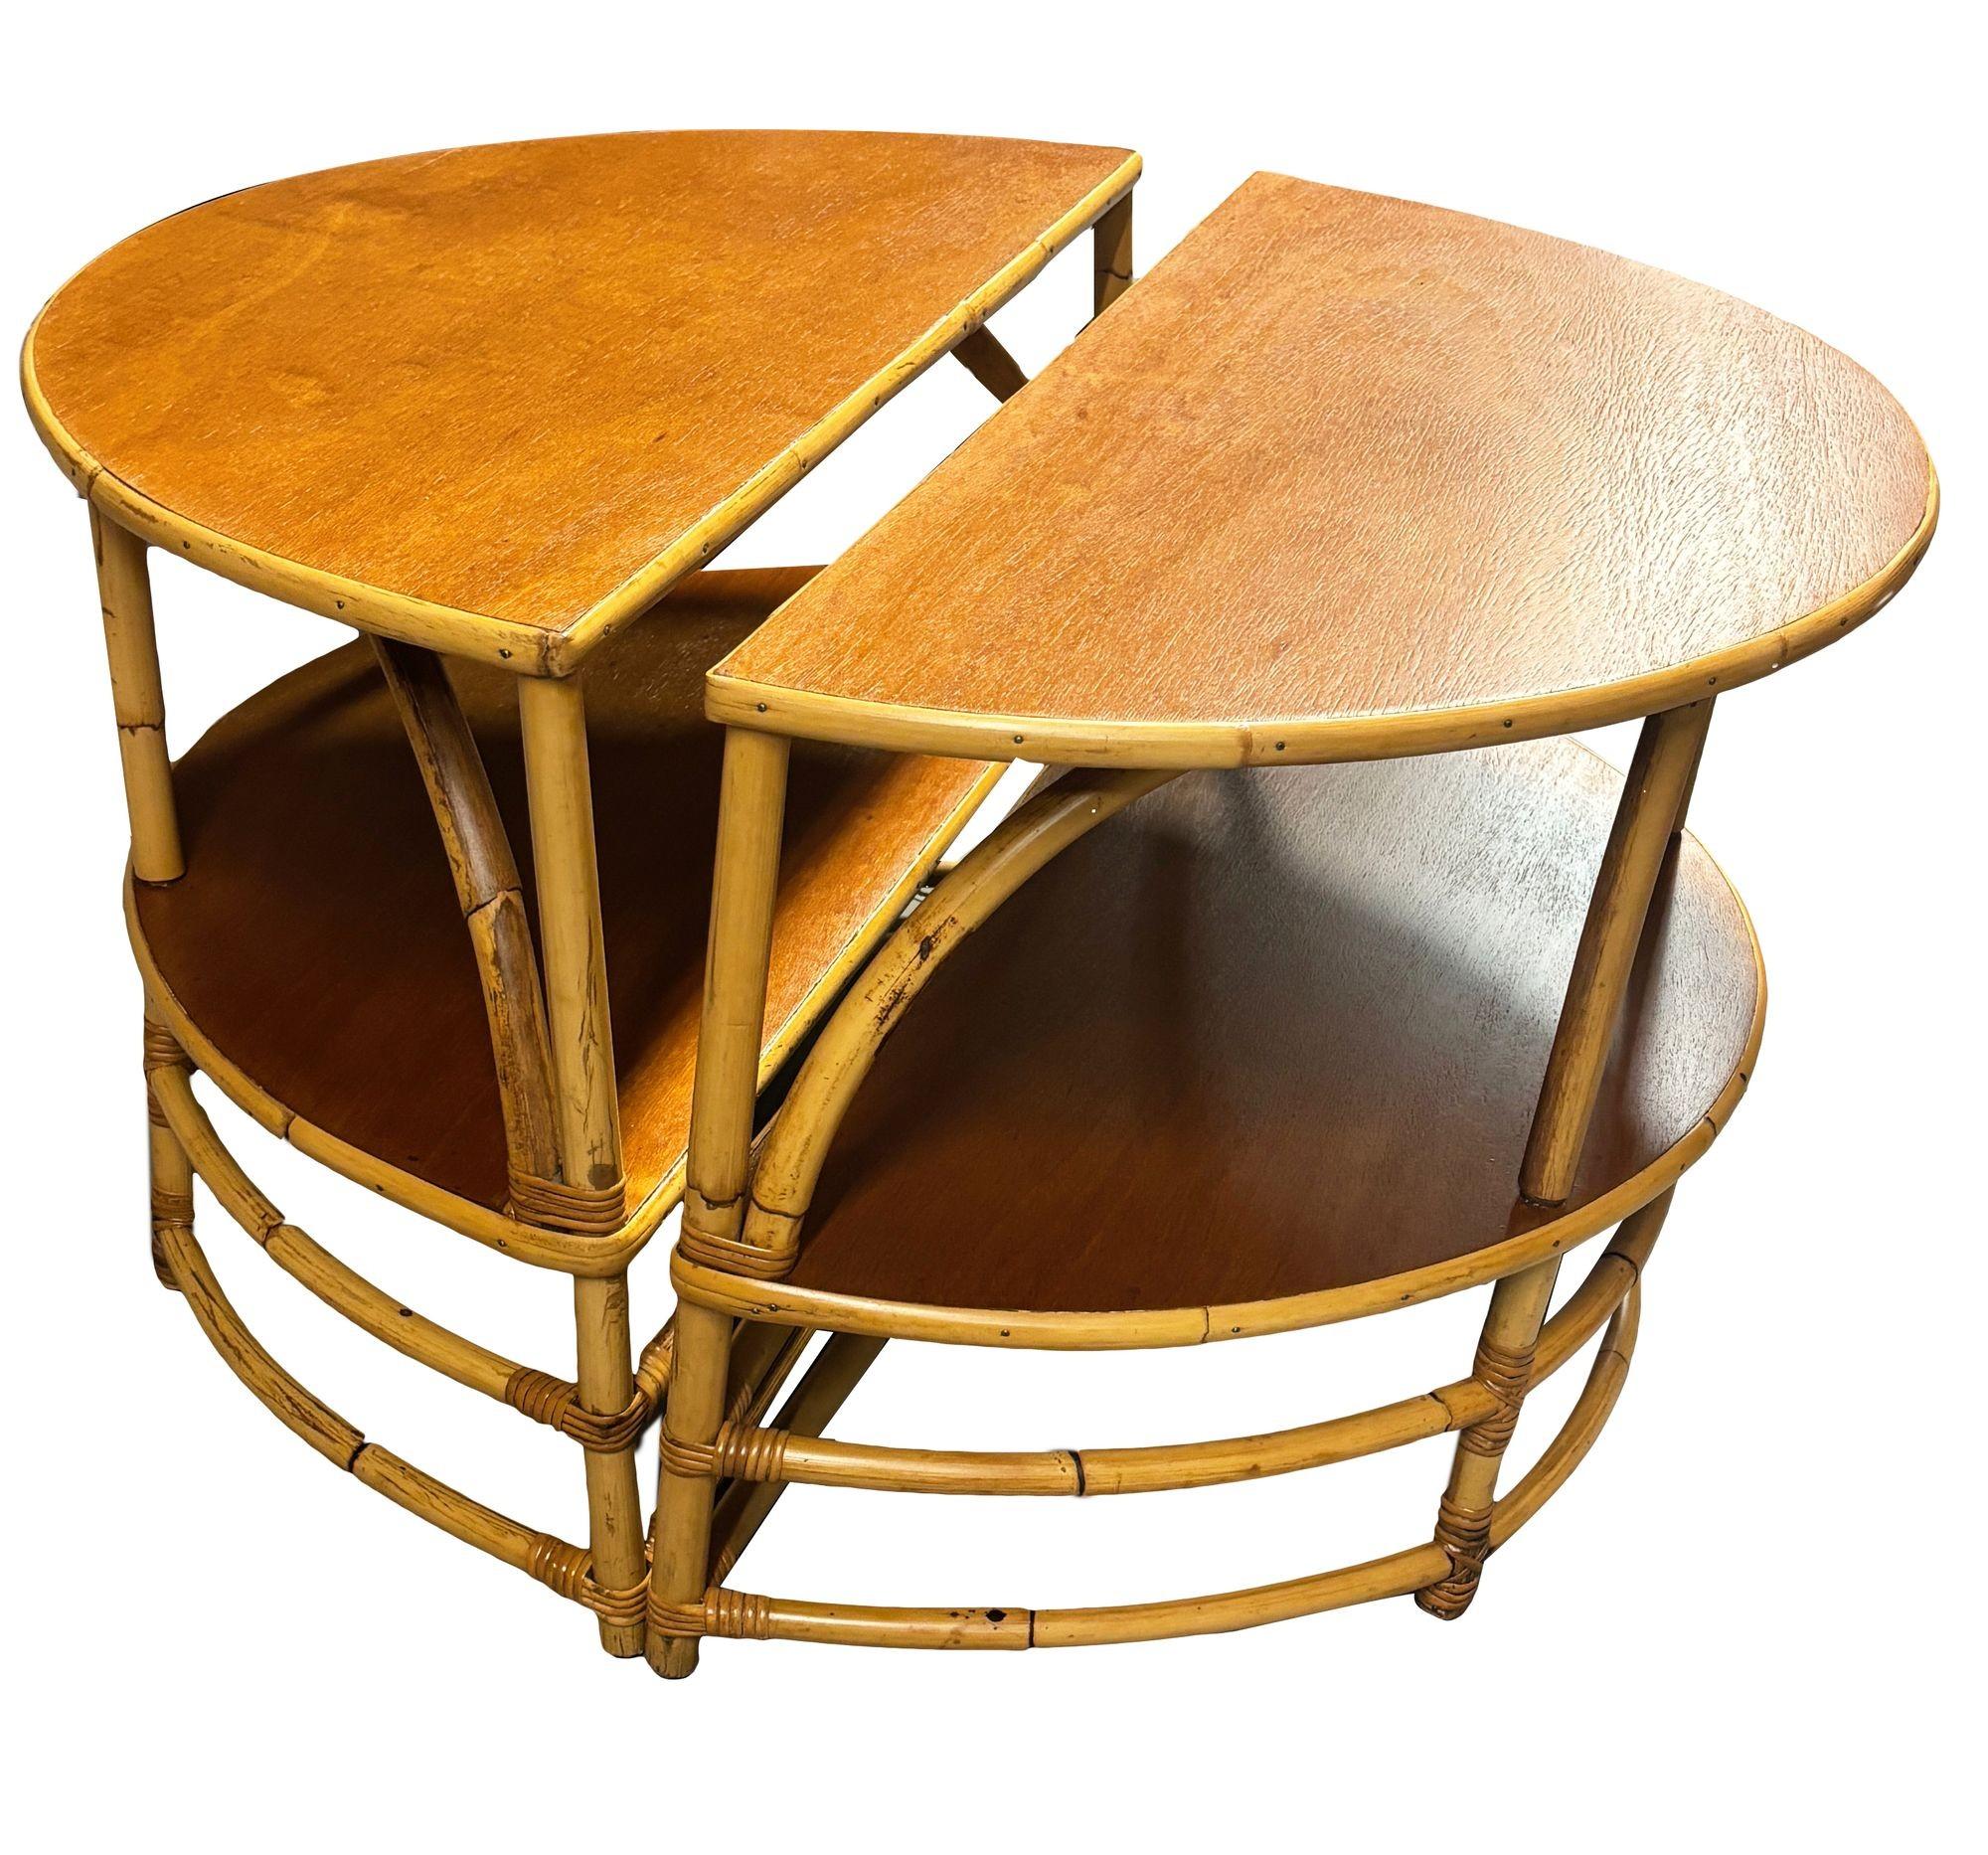 Elevate your entryway with this half-round side table pair which combines to make a larger full-moon round center table. The table set has convenient storage shelves for magazines, phones, remotes, or anything else you have. Crafted with arches on